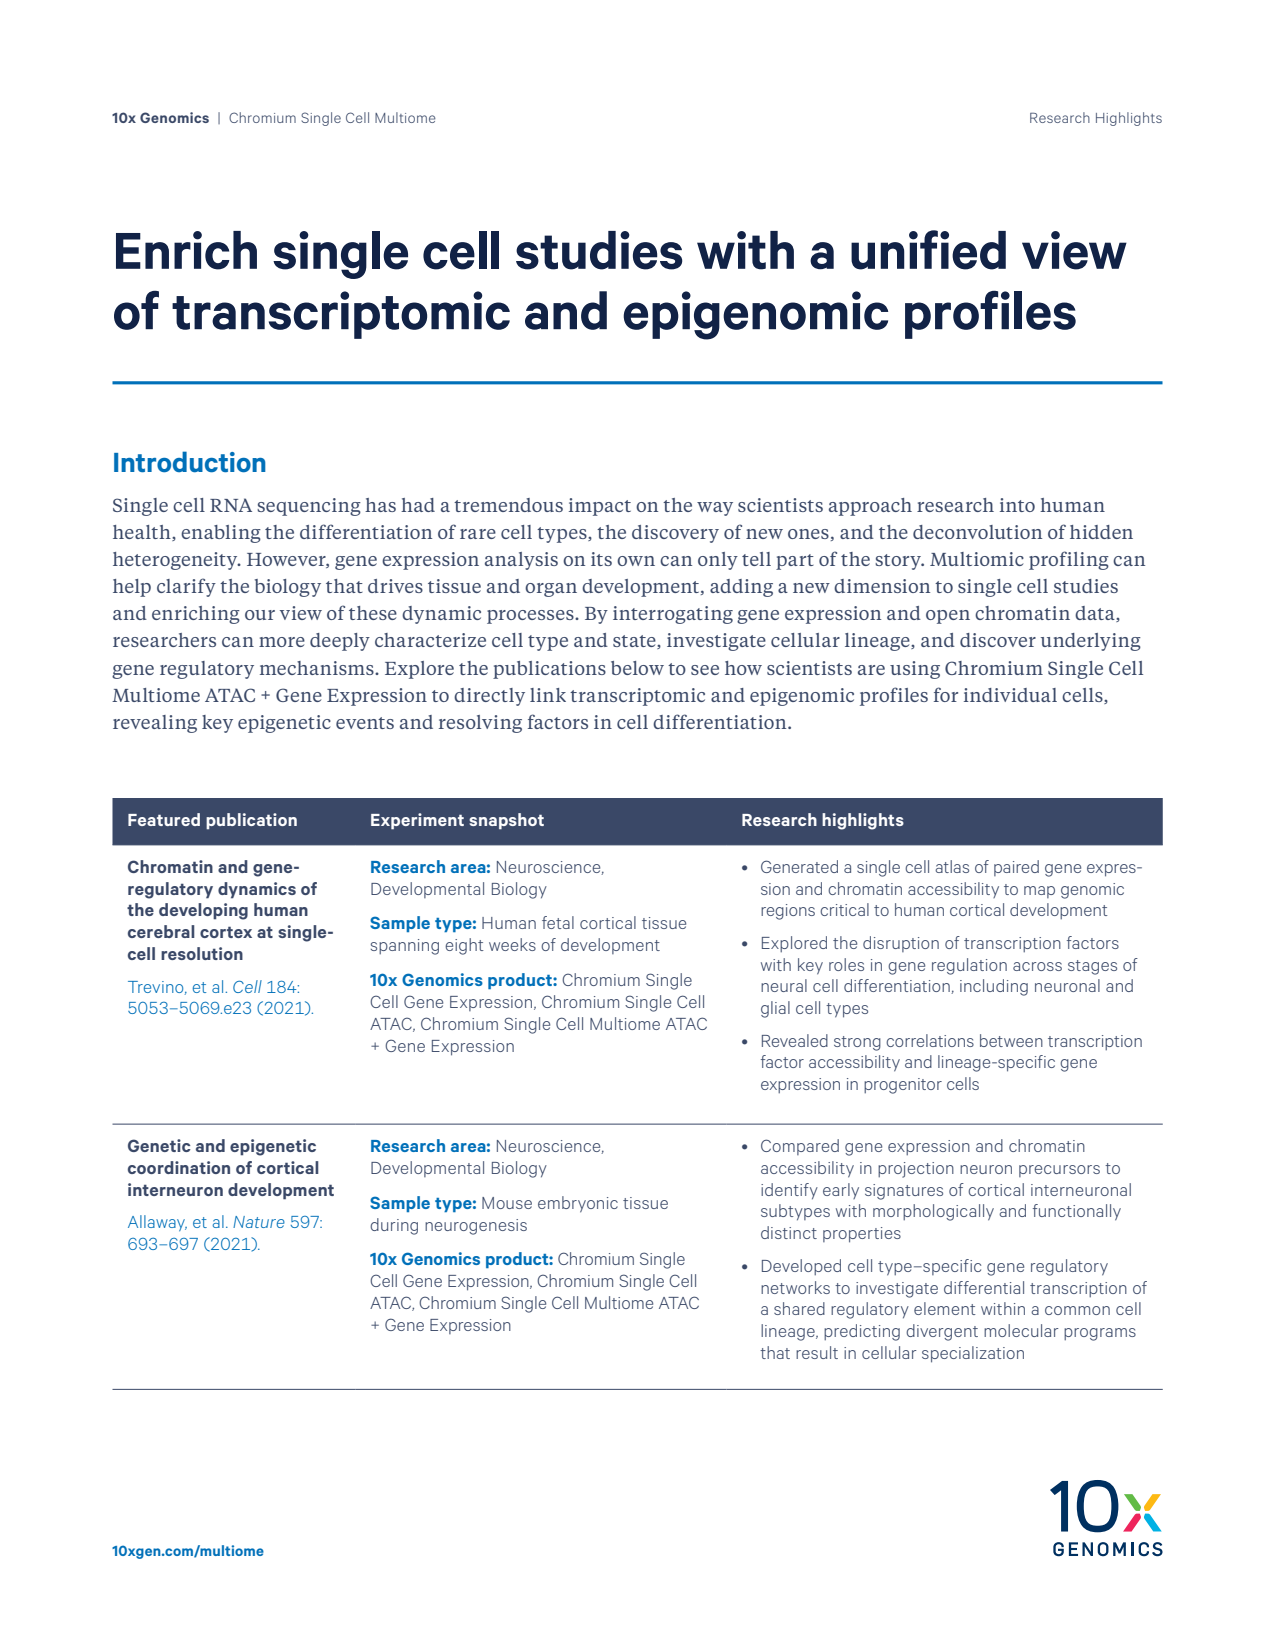 Enrich single cell studies with a unified view of transcriptomic and epigenomic profiles